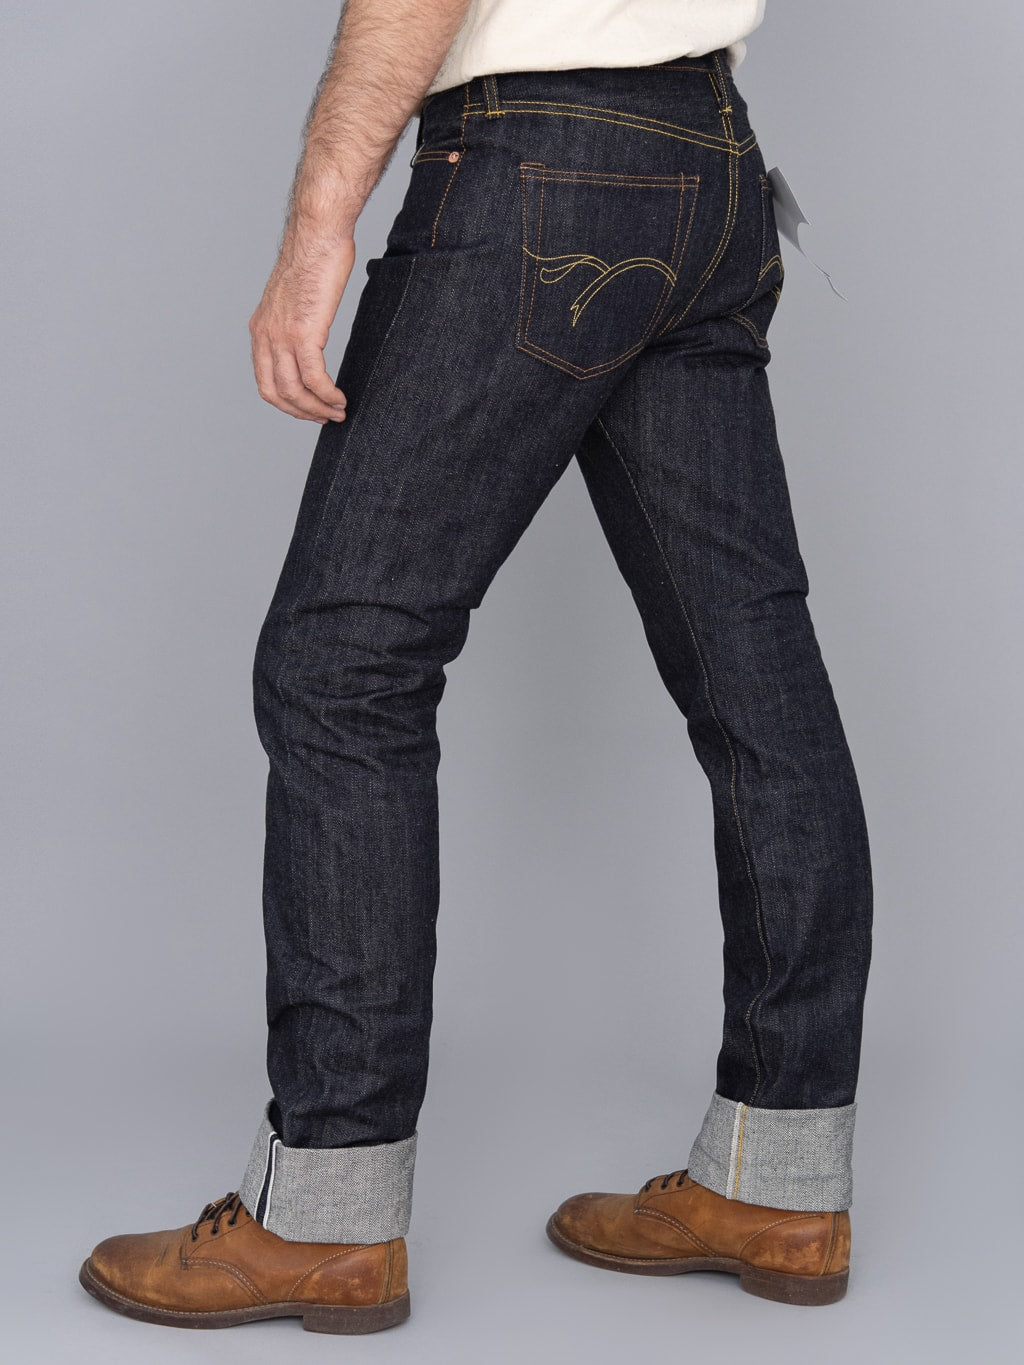 The Flat Head 3002 14.5oz Slim Tapered selvedge Jeans mid rise back